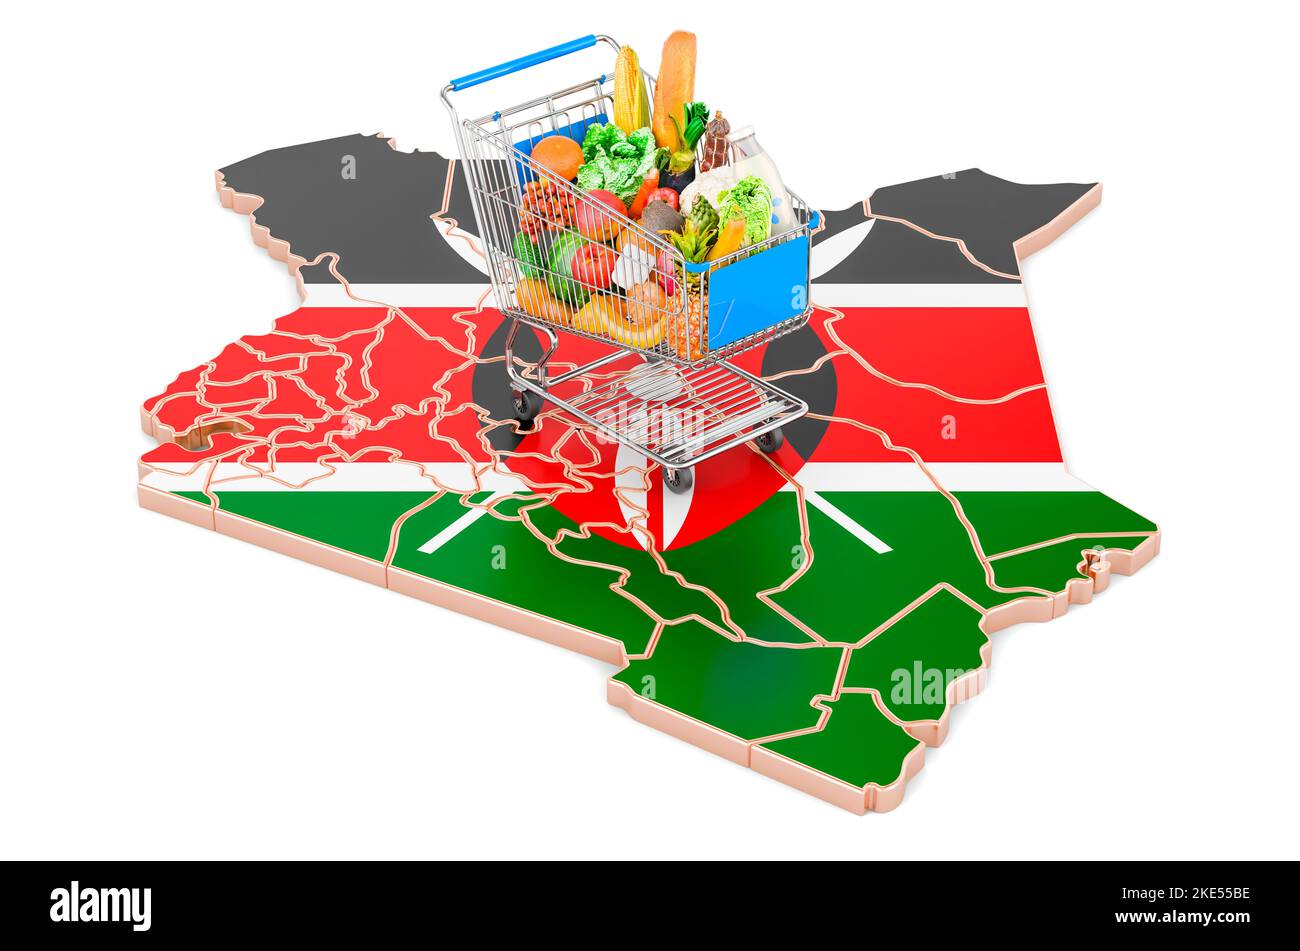 Purchasing power in Kenya concept. Shopping cart with Kenyan map, 3D rendering isolated on white background Stock Photo